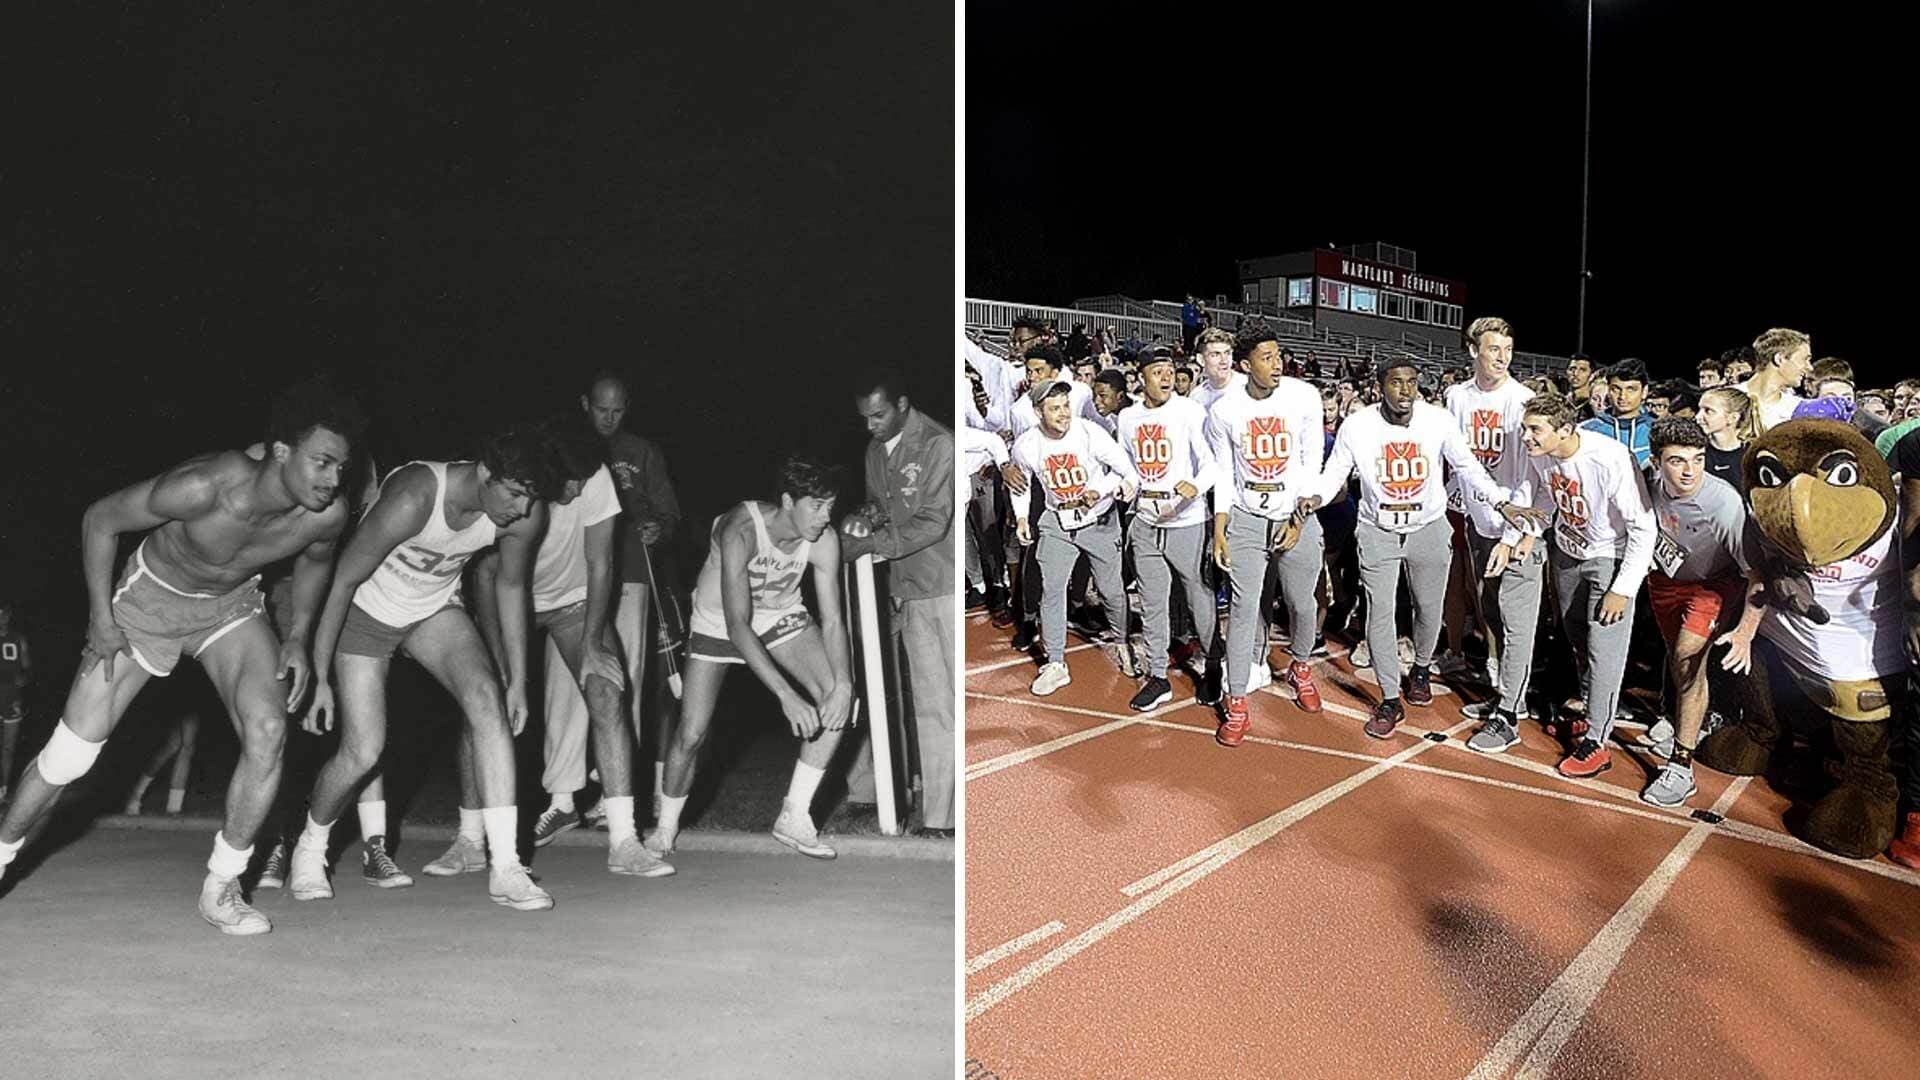 Archival and new pictures of UMD basketball players on the Midnight Mile starting line